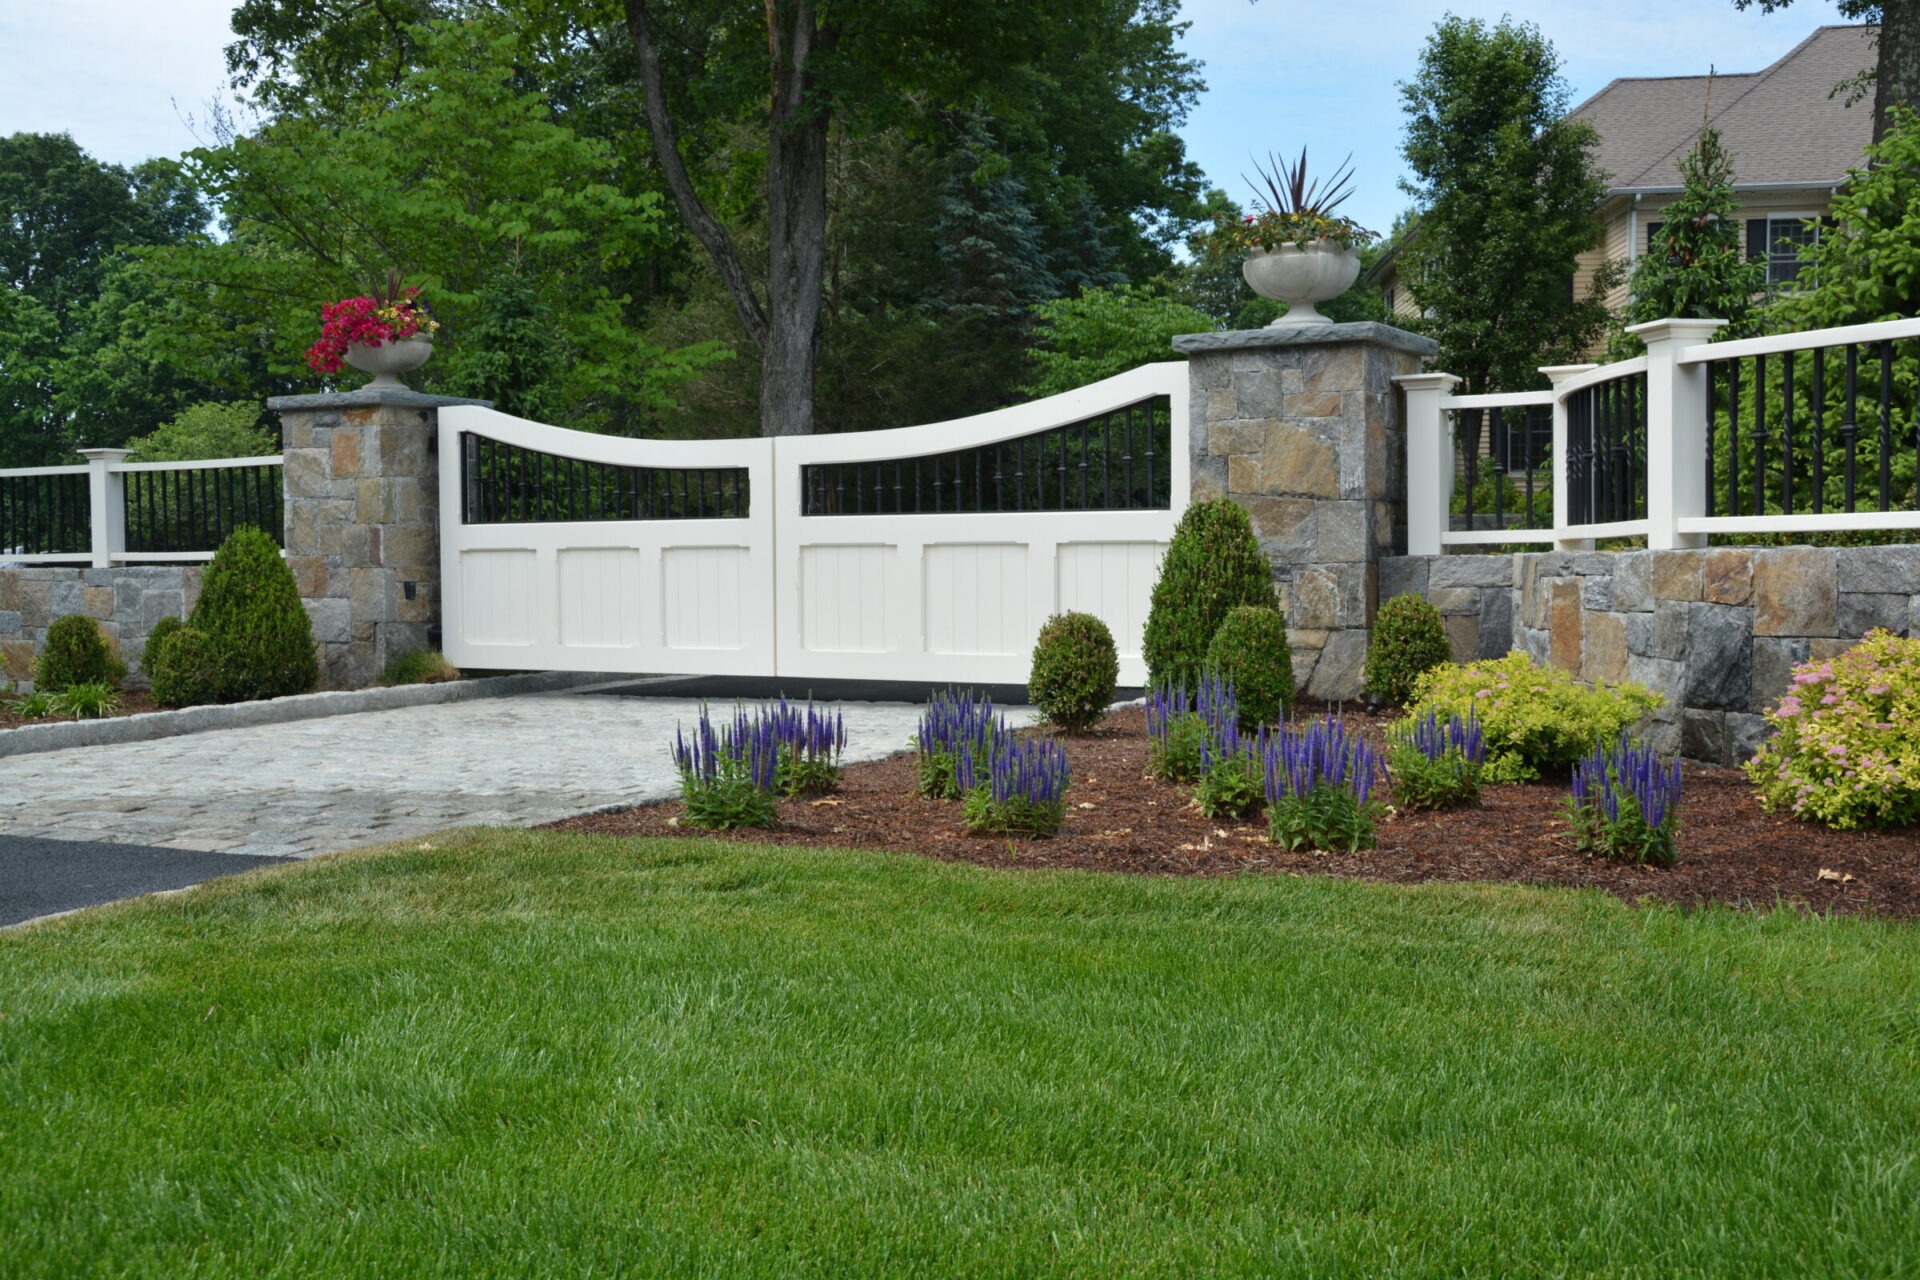 A white automated driveway gate with stone pillars and decorative plants stands between a lush lawn and a house partially visible in the background.